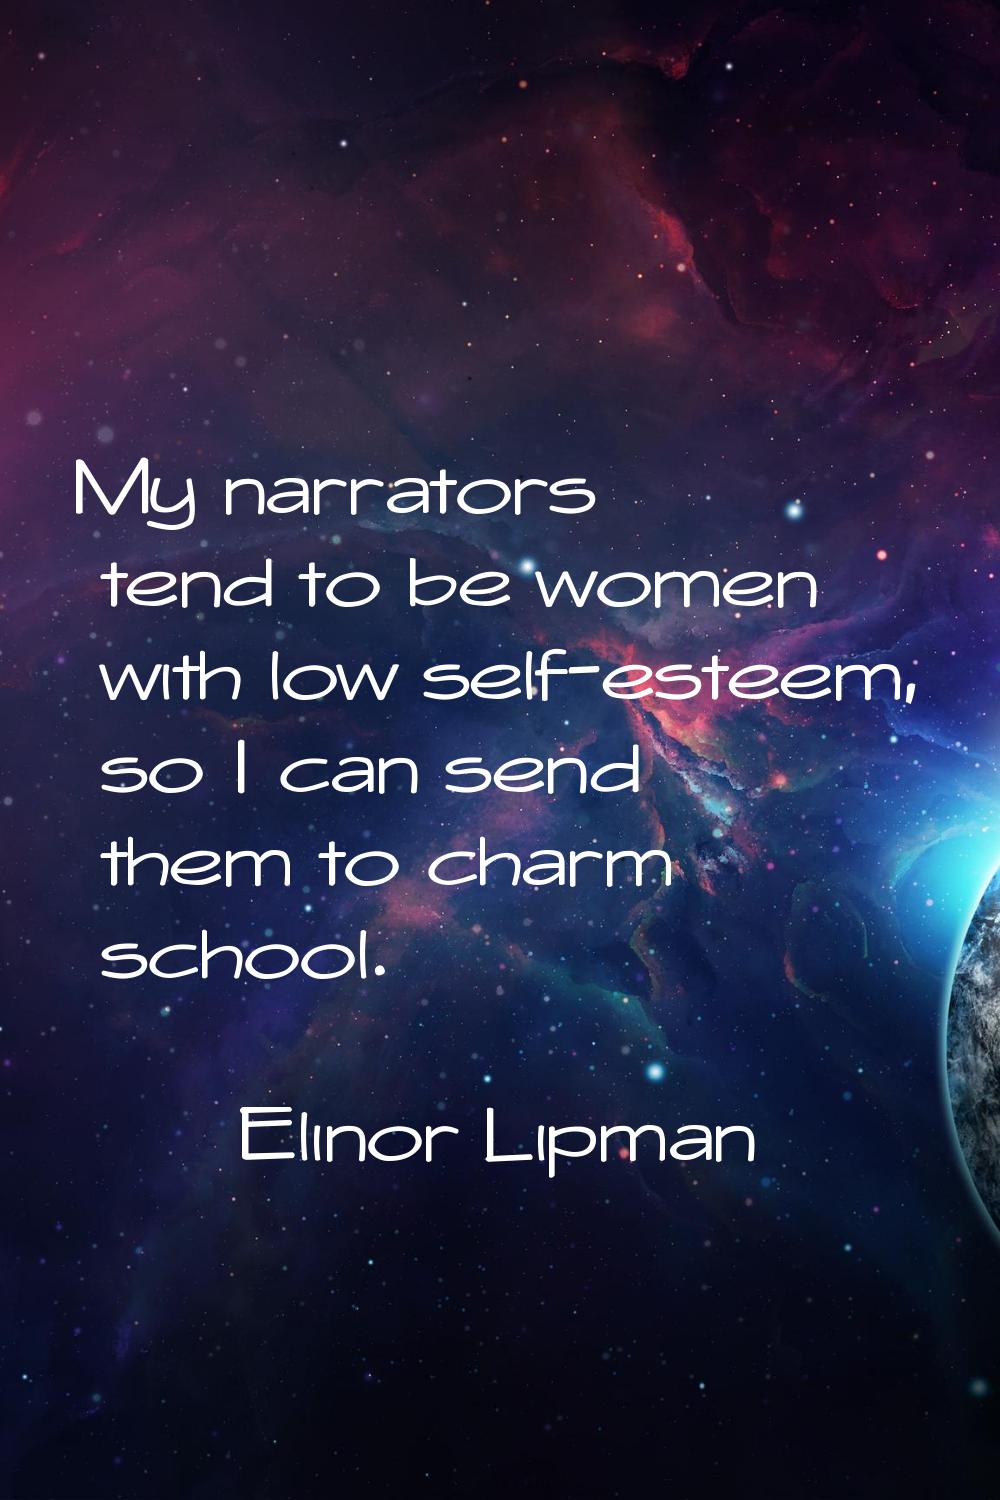 My narrators tend to be women with low self-esteem, so I can send them to charm school.